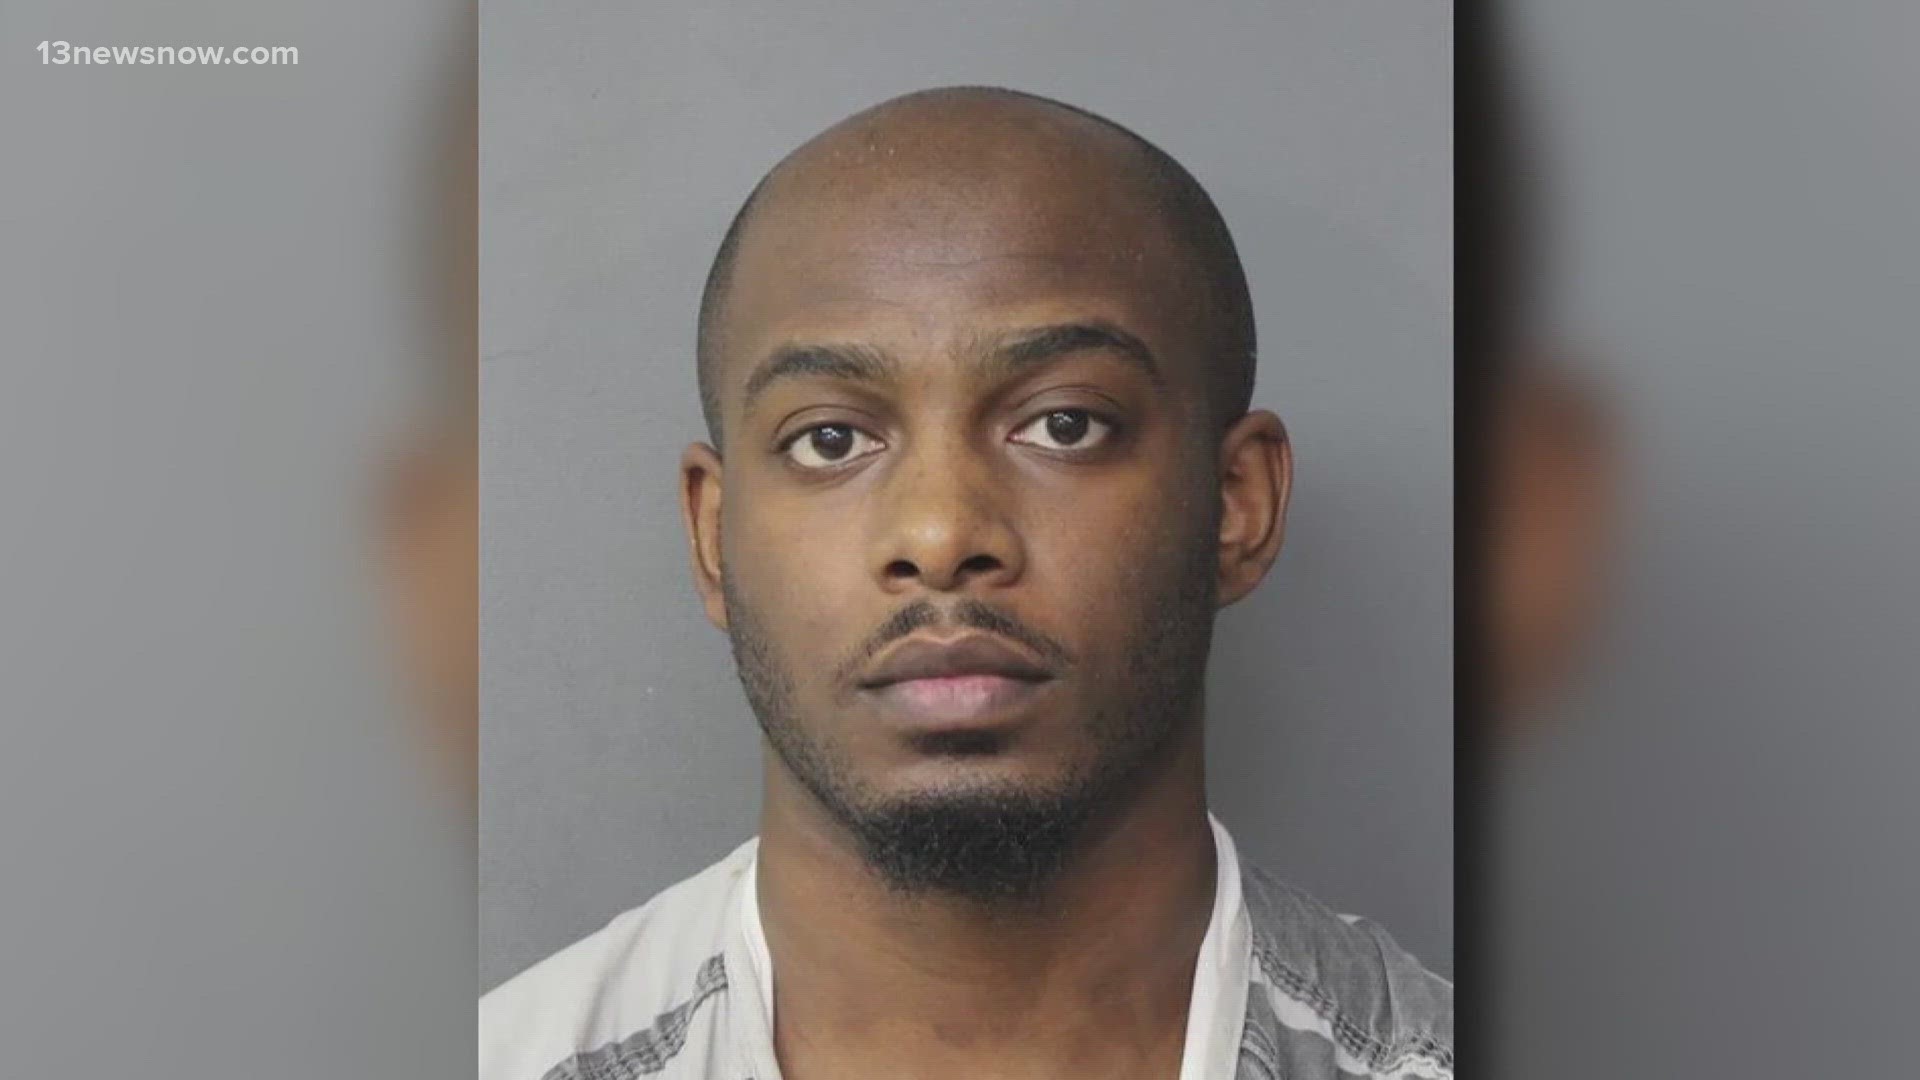 He's accused of killing William & Mary football player Nate Evans outside of an ODU house party in 2019.